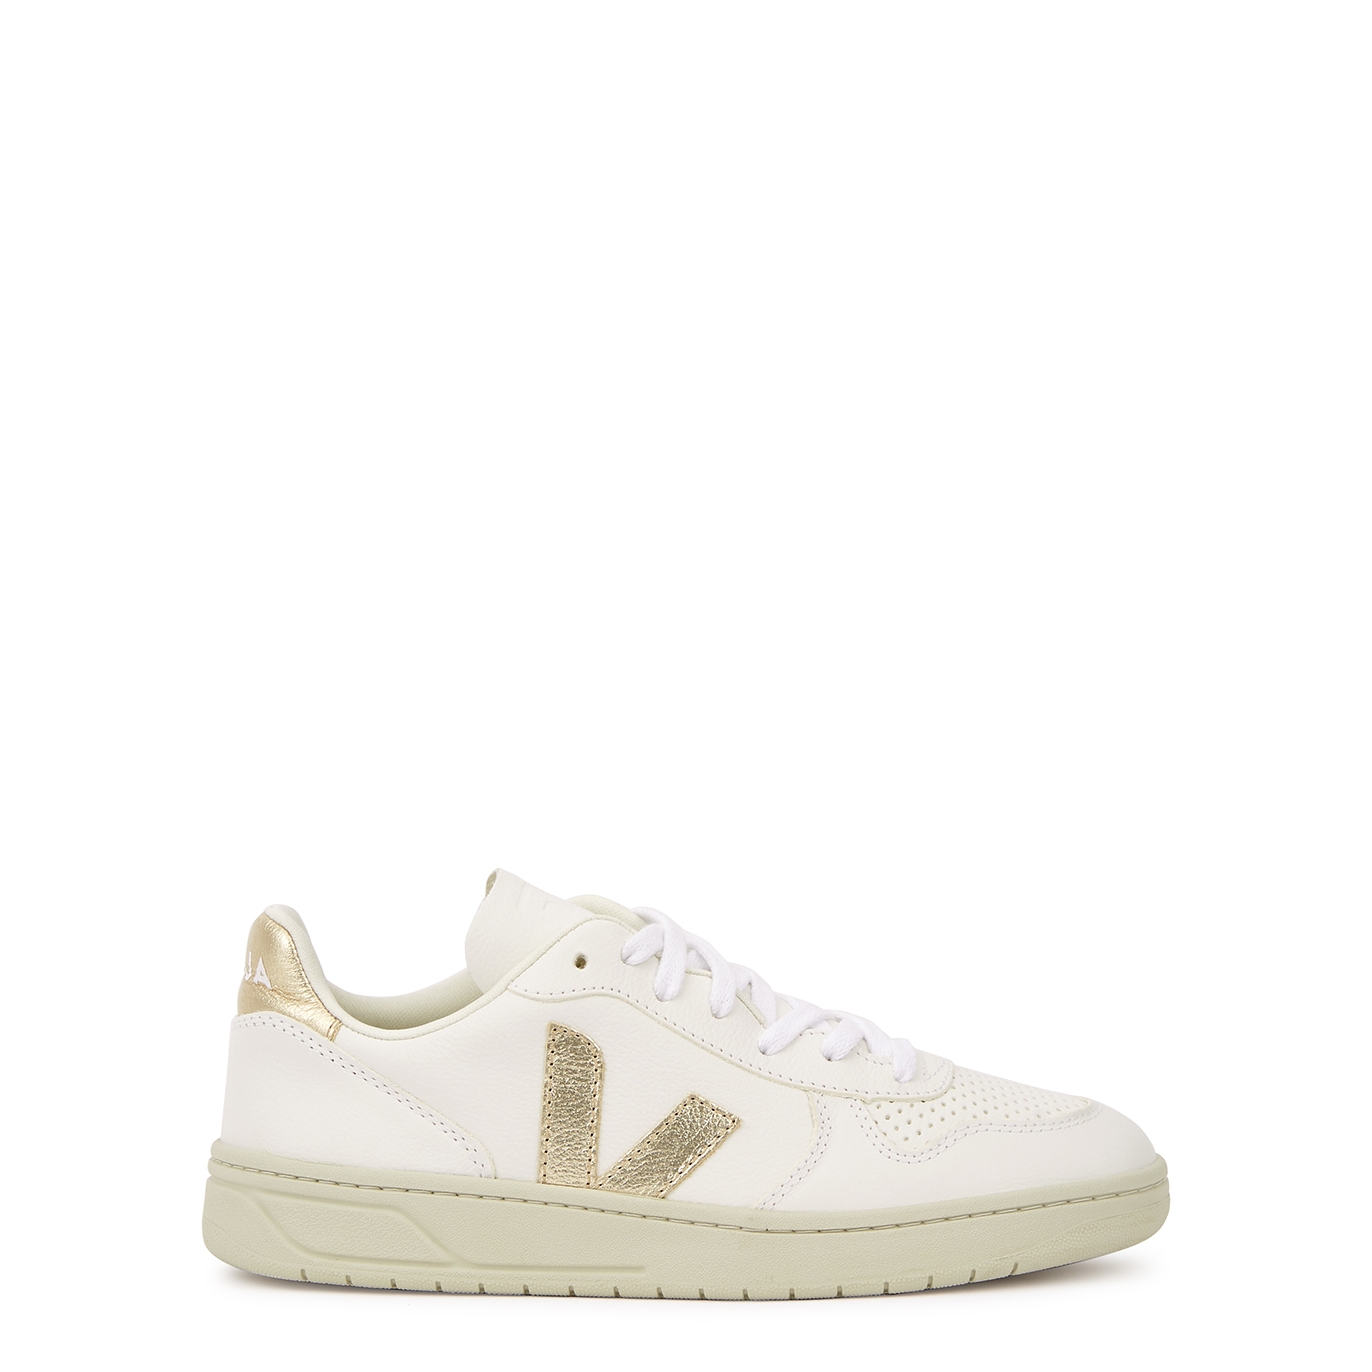 Veja V-10 White Leather Sneakers, Sneakers, White, Leather, Round toe - 5